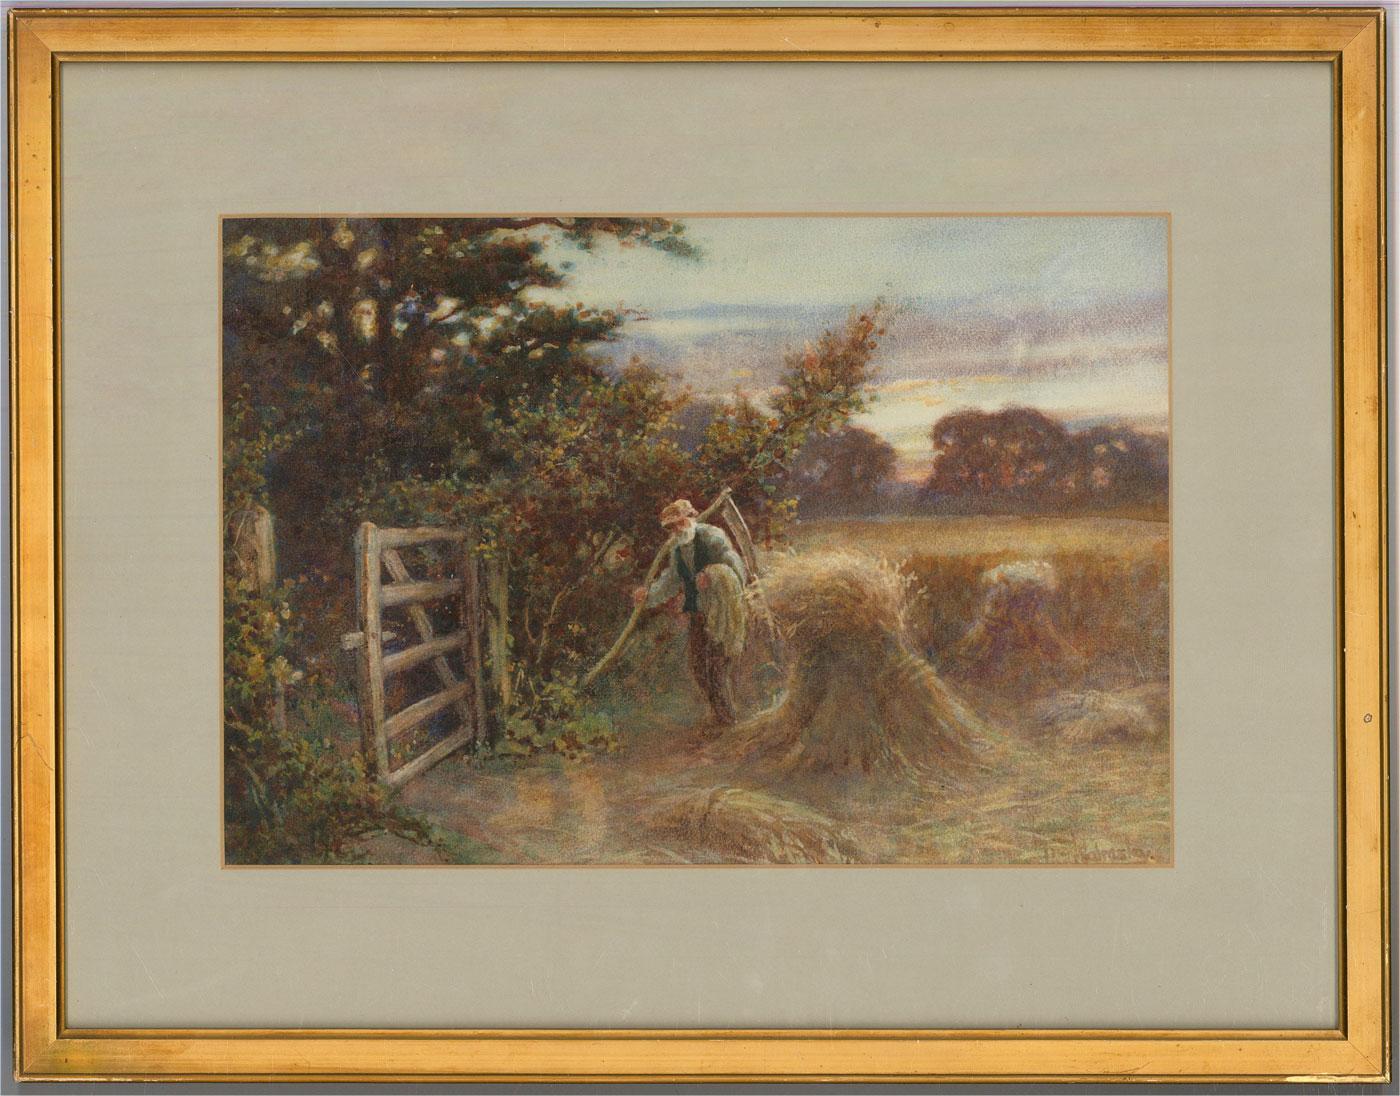 A charming watercolour scene of a farmer walking home after a long day of stacking hay. We can see he is holding his scythe in one hand and a piece of fabric in the other as he walks towards the open gate. Well presented in a mount and gilt frame.